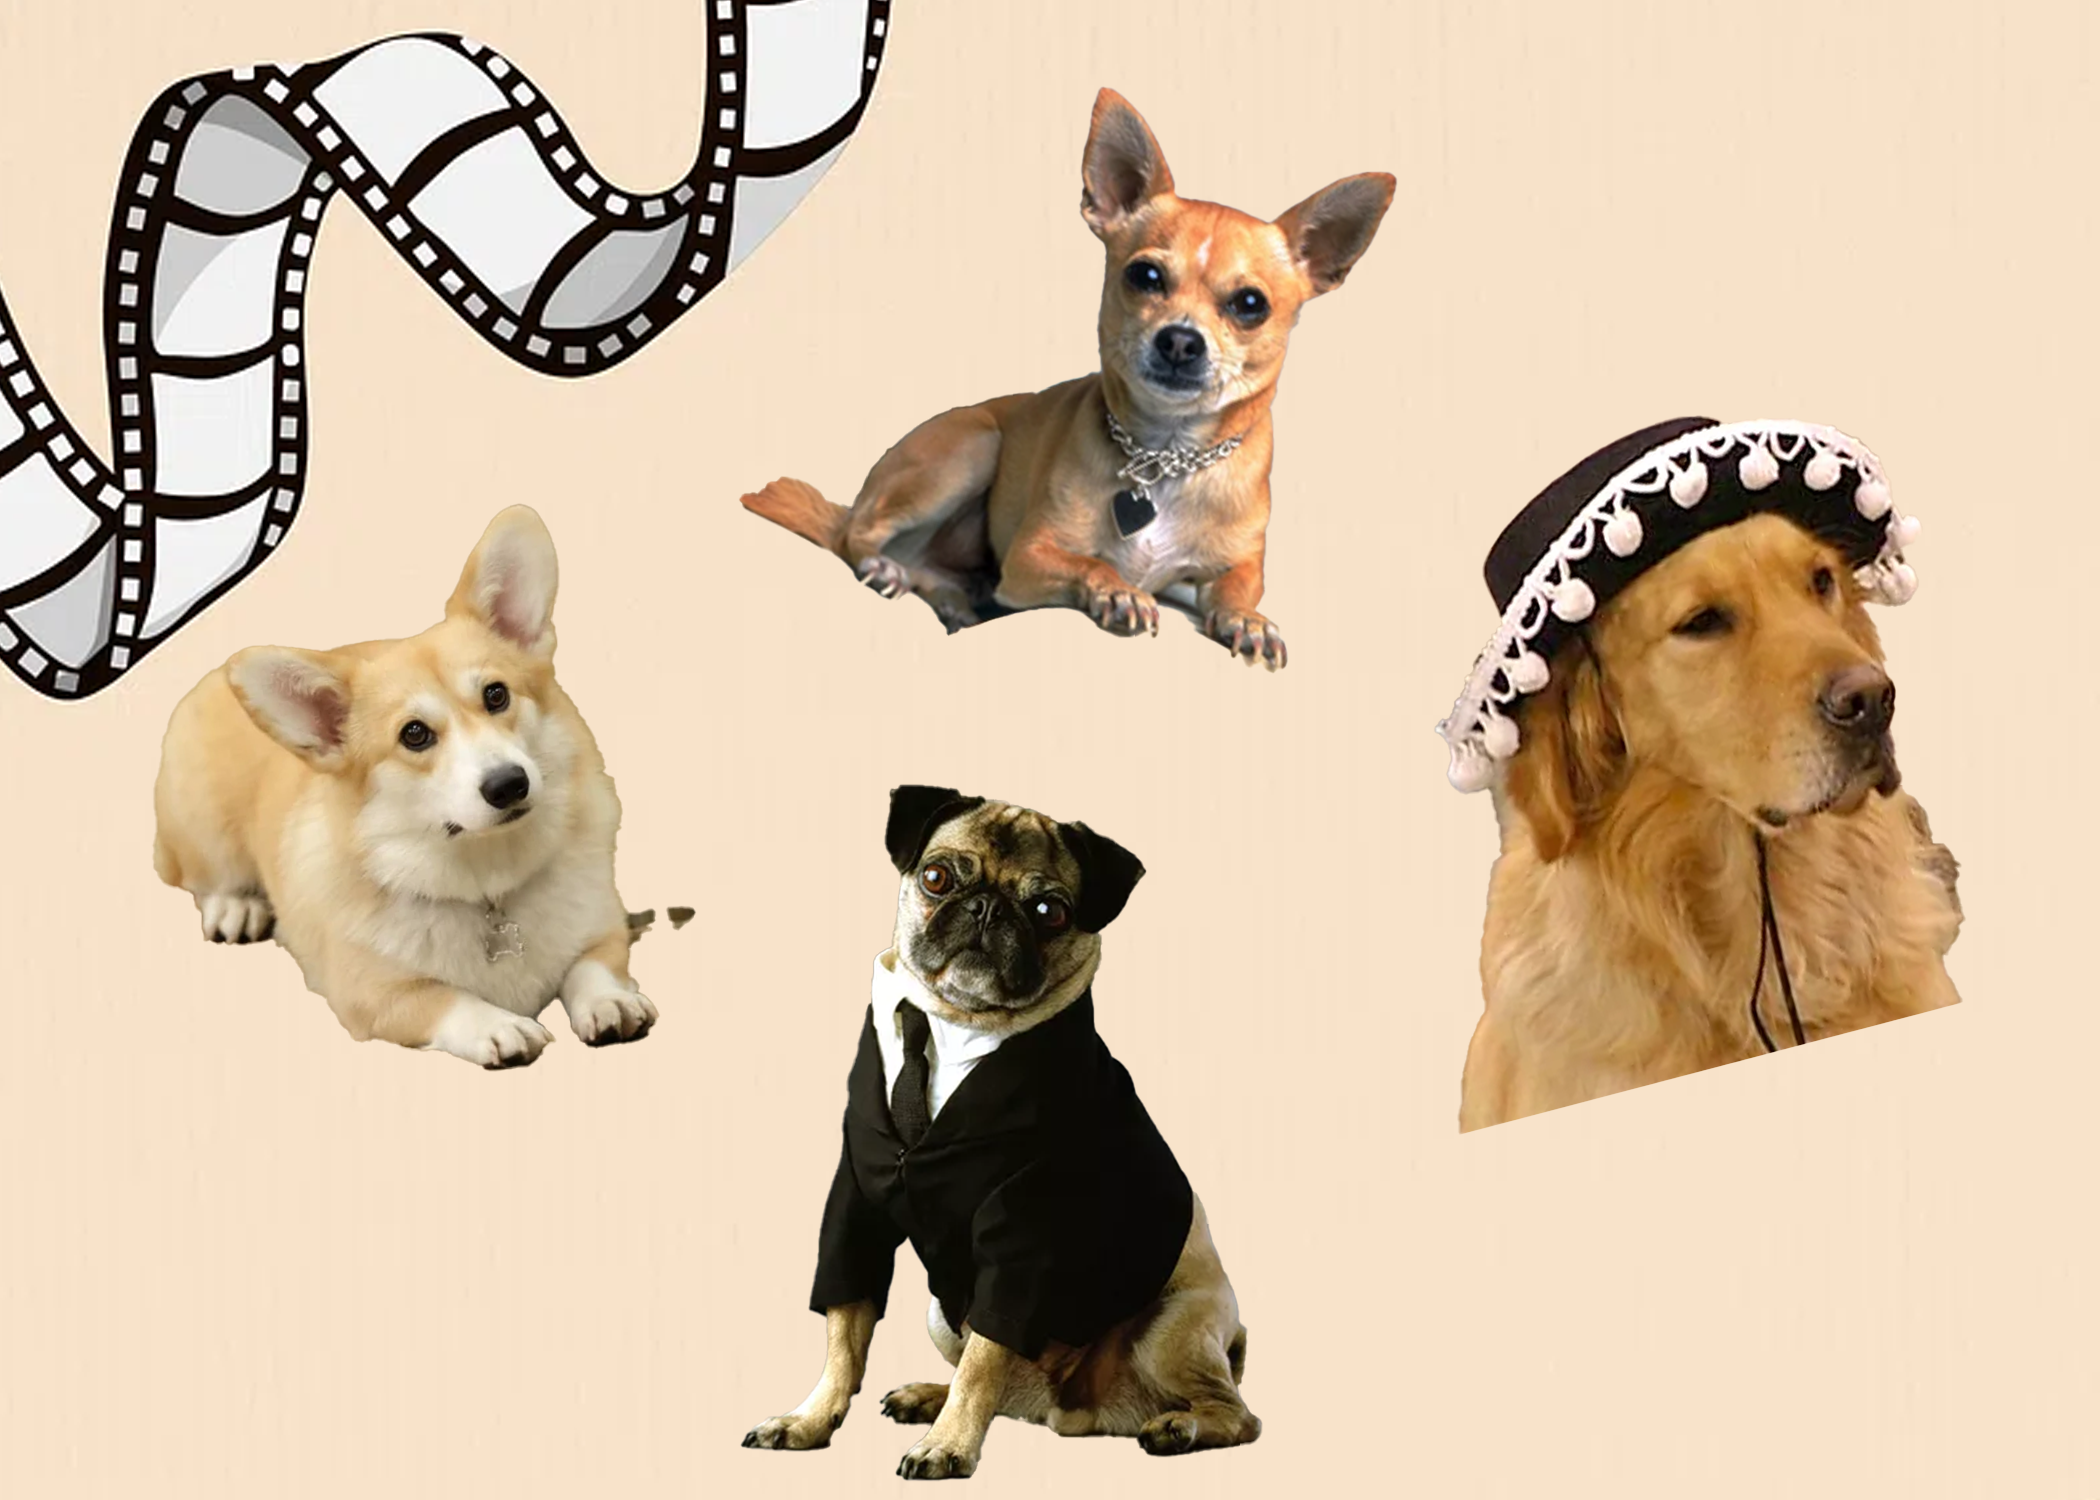 Can You Identify These Dogs From Movies and TV Shows?